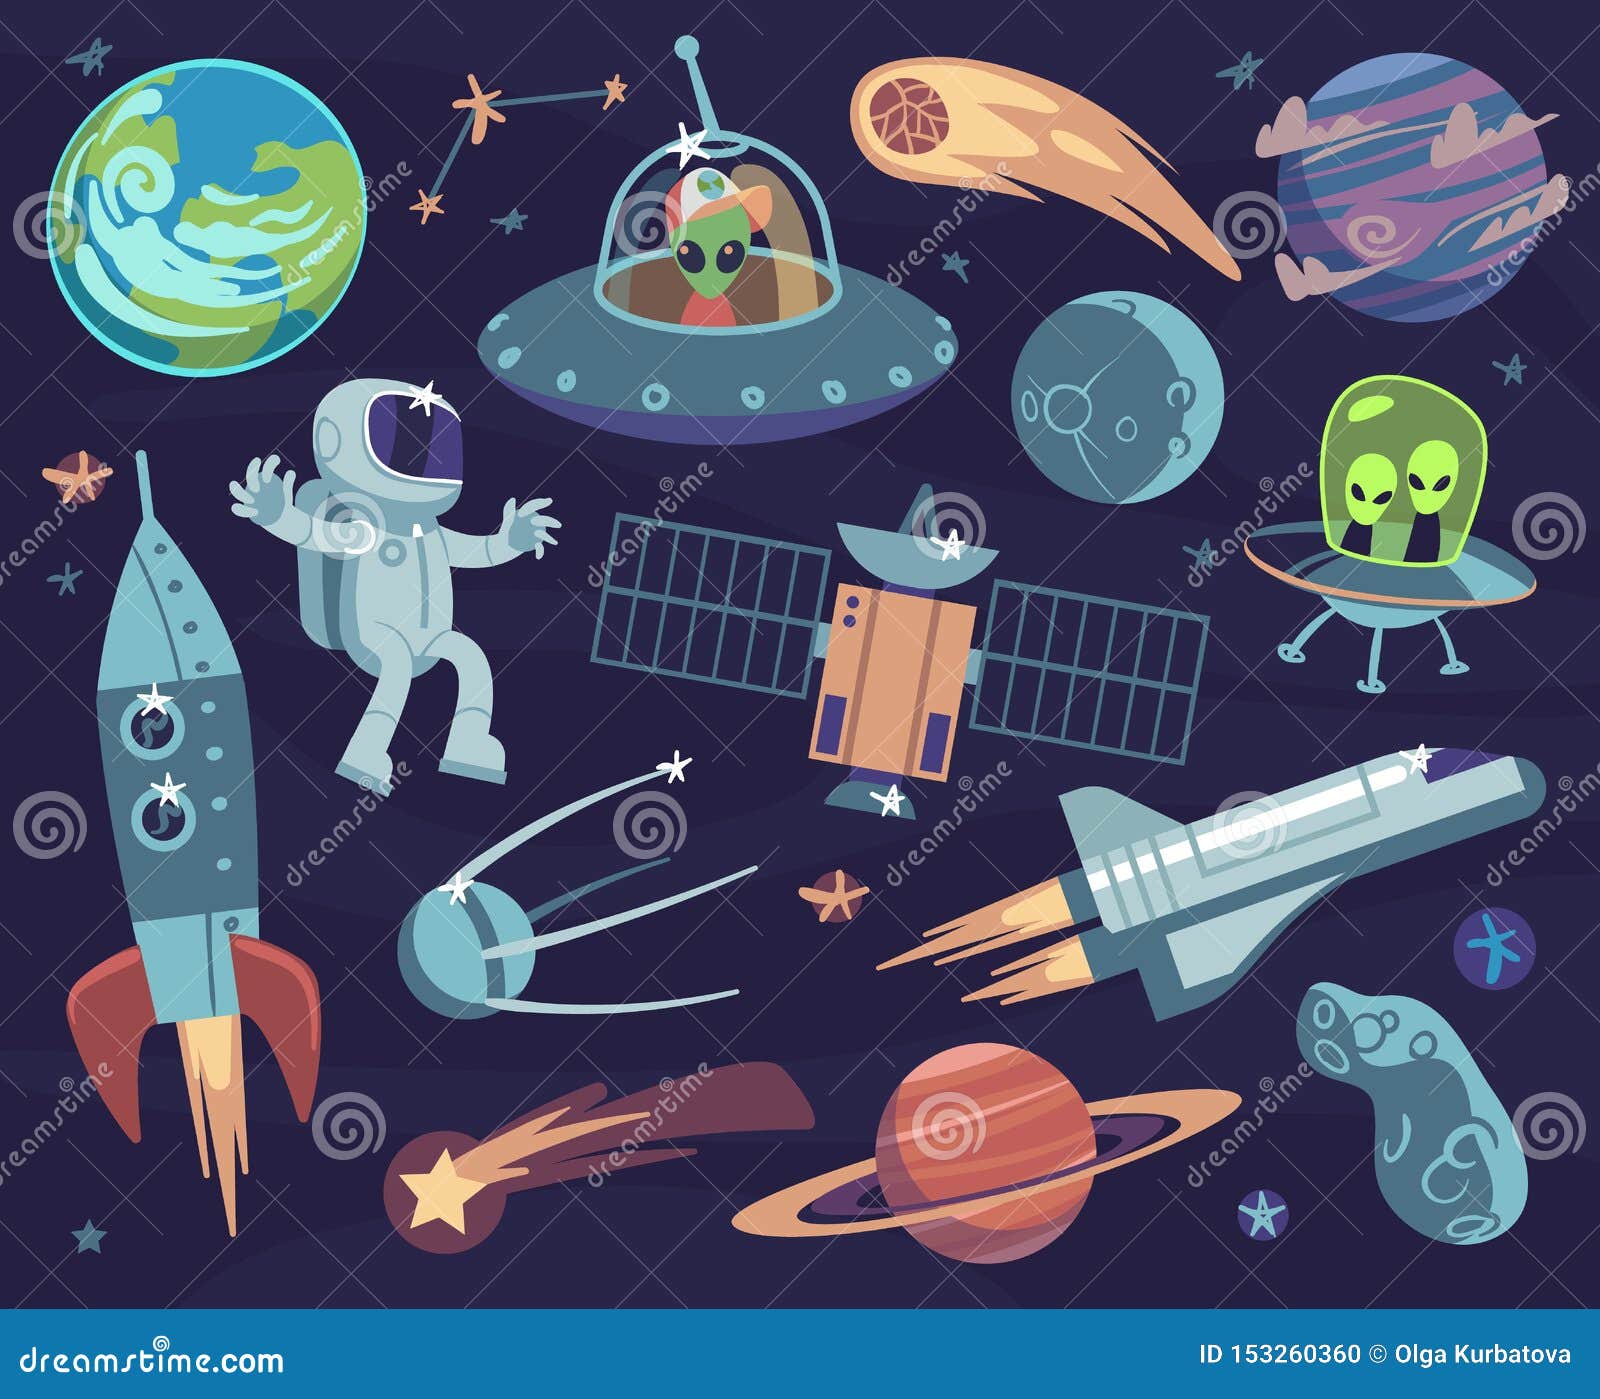 planets and More!300 DPI HighQuality Os004 universe rocket space illustration Space ship clipart- spaceship doodles outer space cosmos